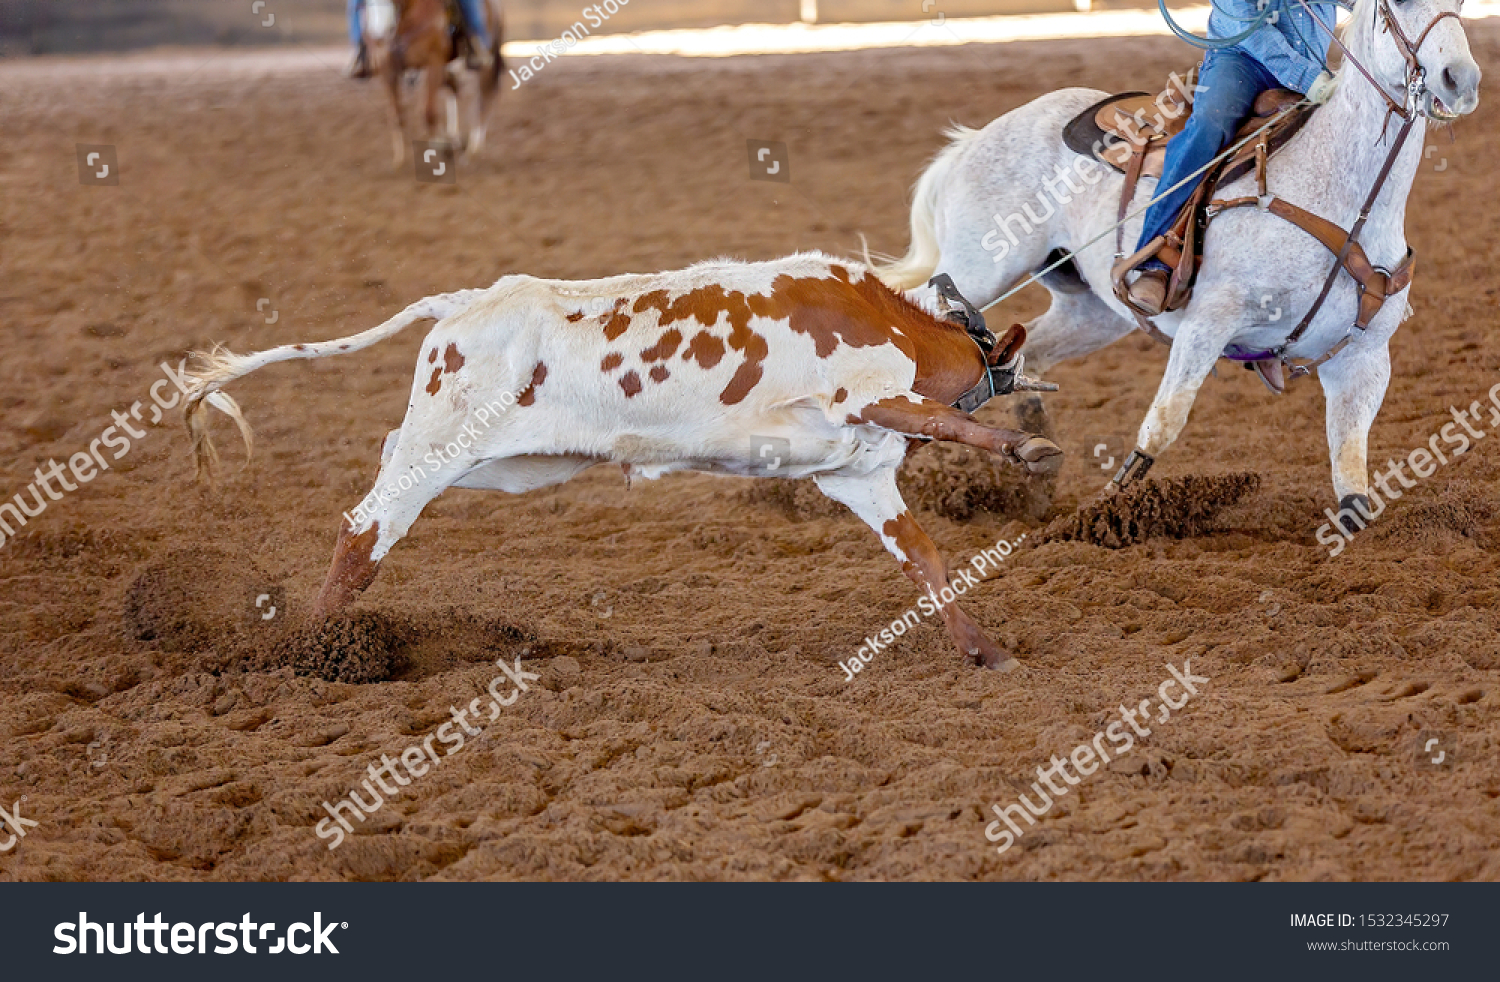 A calf being lassoed by cowboys on horseback in a team calf roping competition at a country rodeo #1532345297